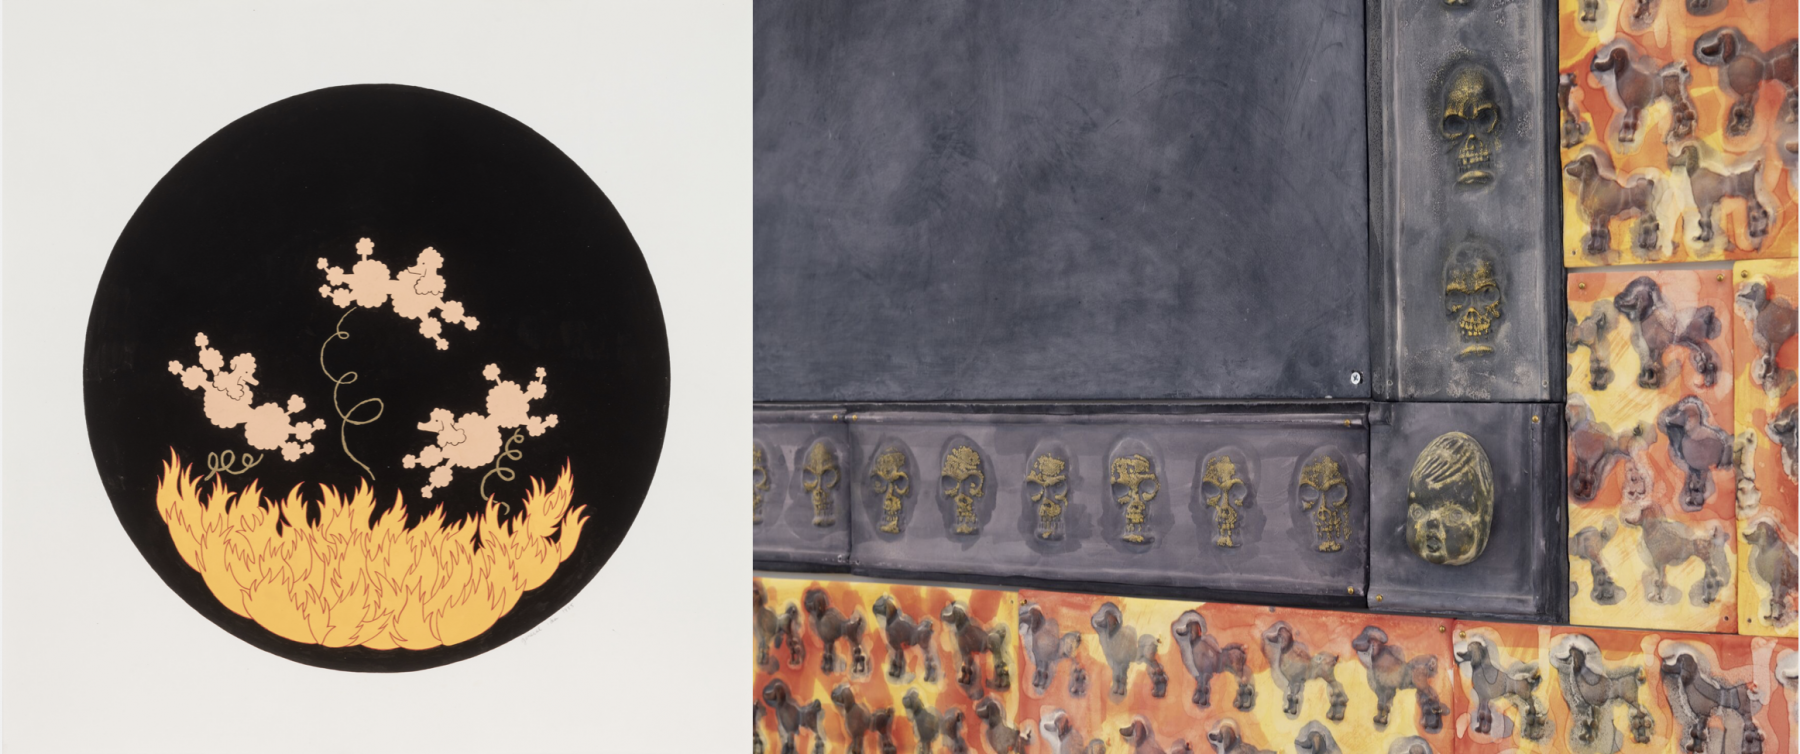 GENERAL IDEA

Left to right: Study for the Firewall (Phoenix with a P) (1985); detail of Firewall (1985)